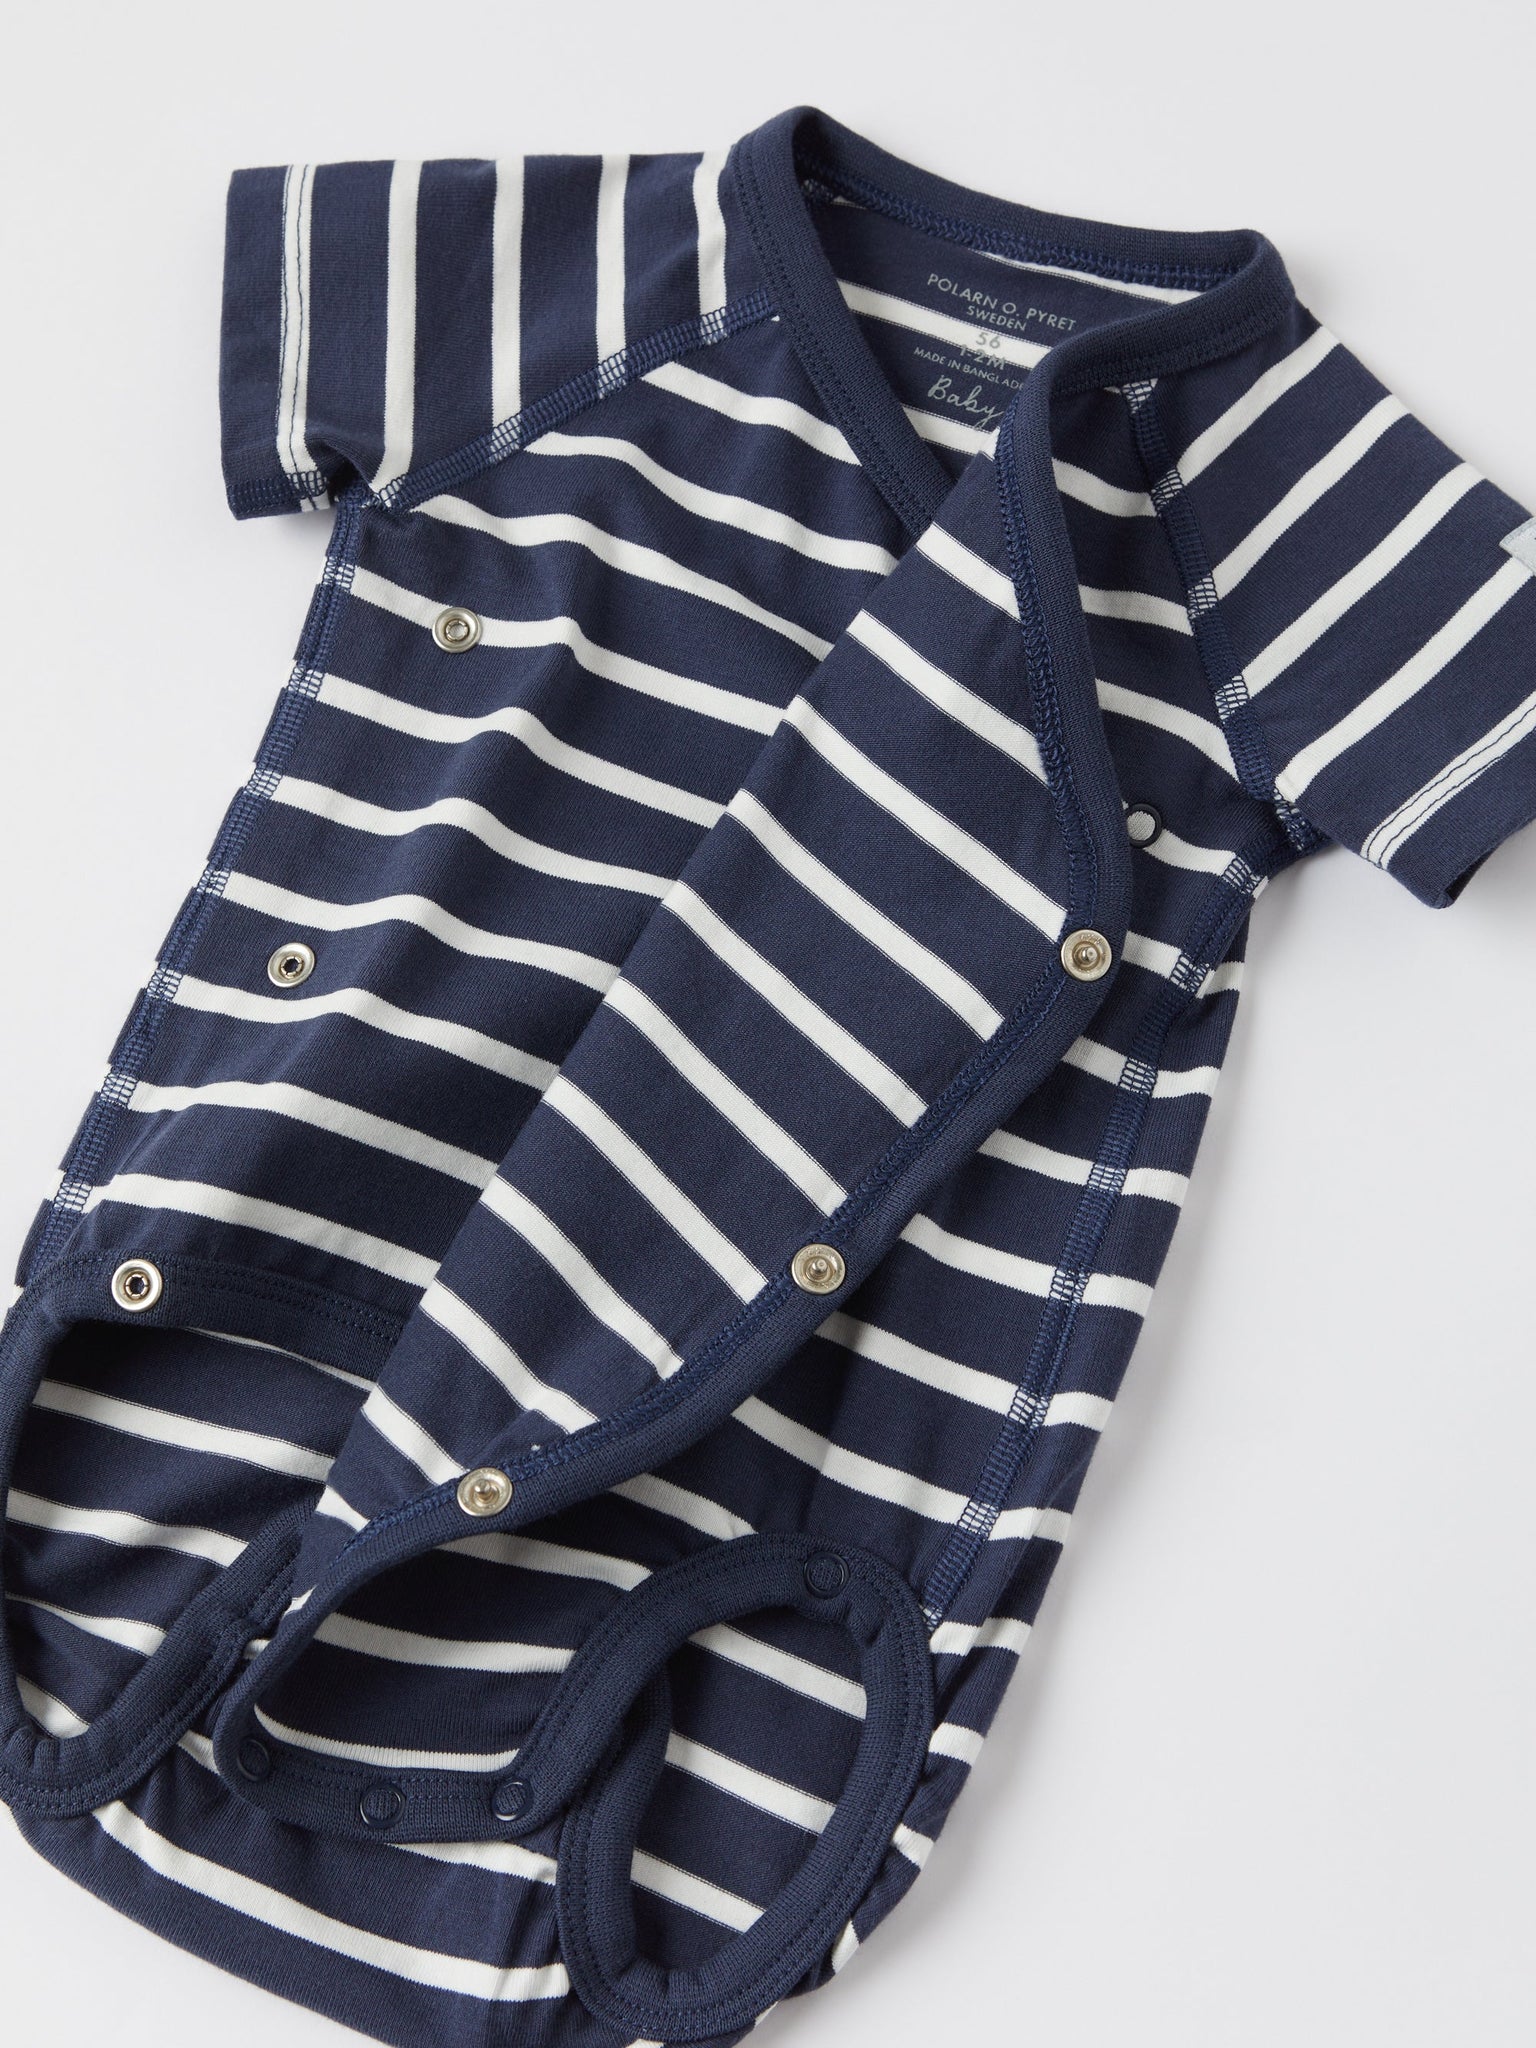 Navy Striped Wraparound Babygrow from the Polarn O. Pyret baby collection. The best ethical kids clothes